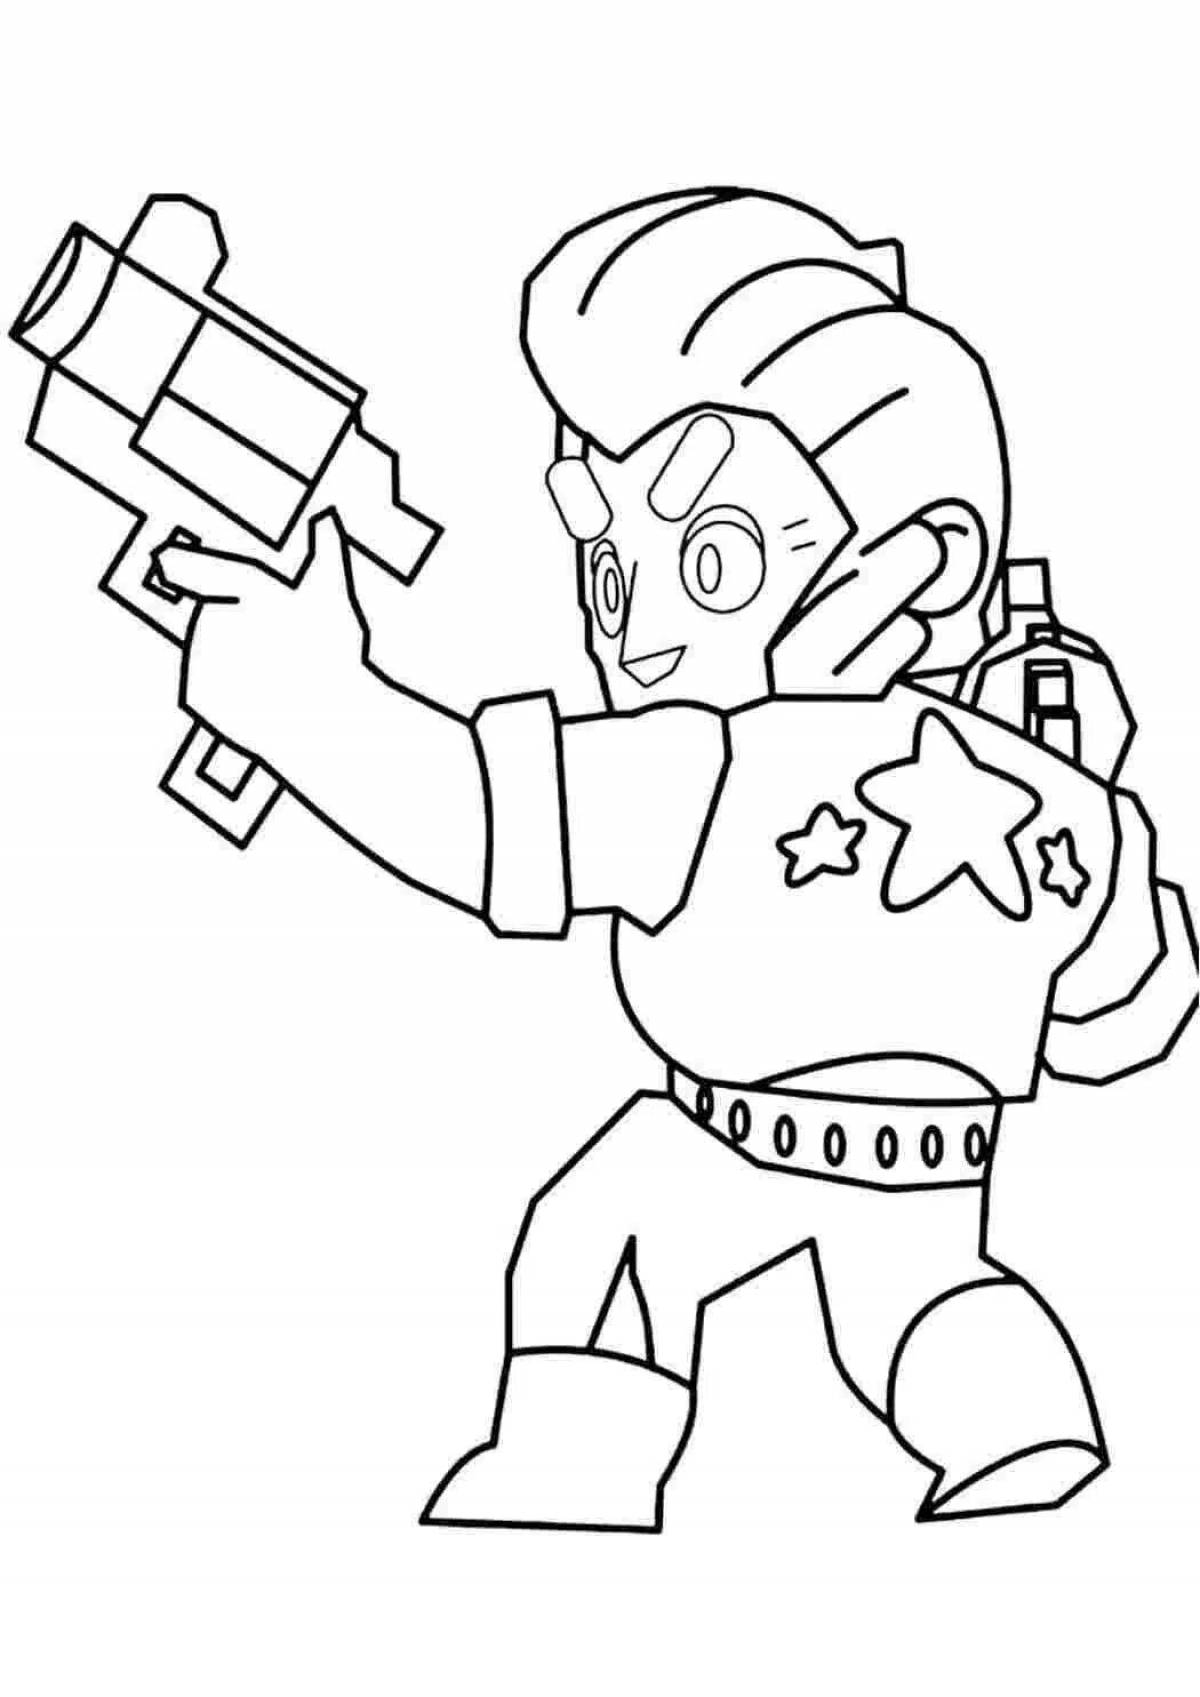 Majestic fighters brawl stars coloring page